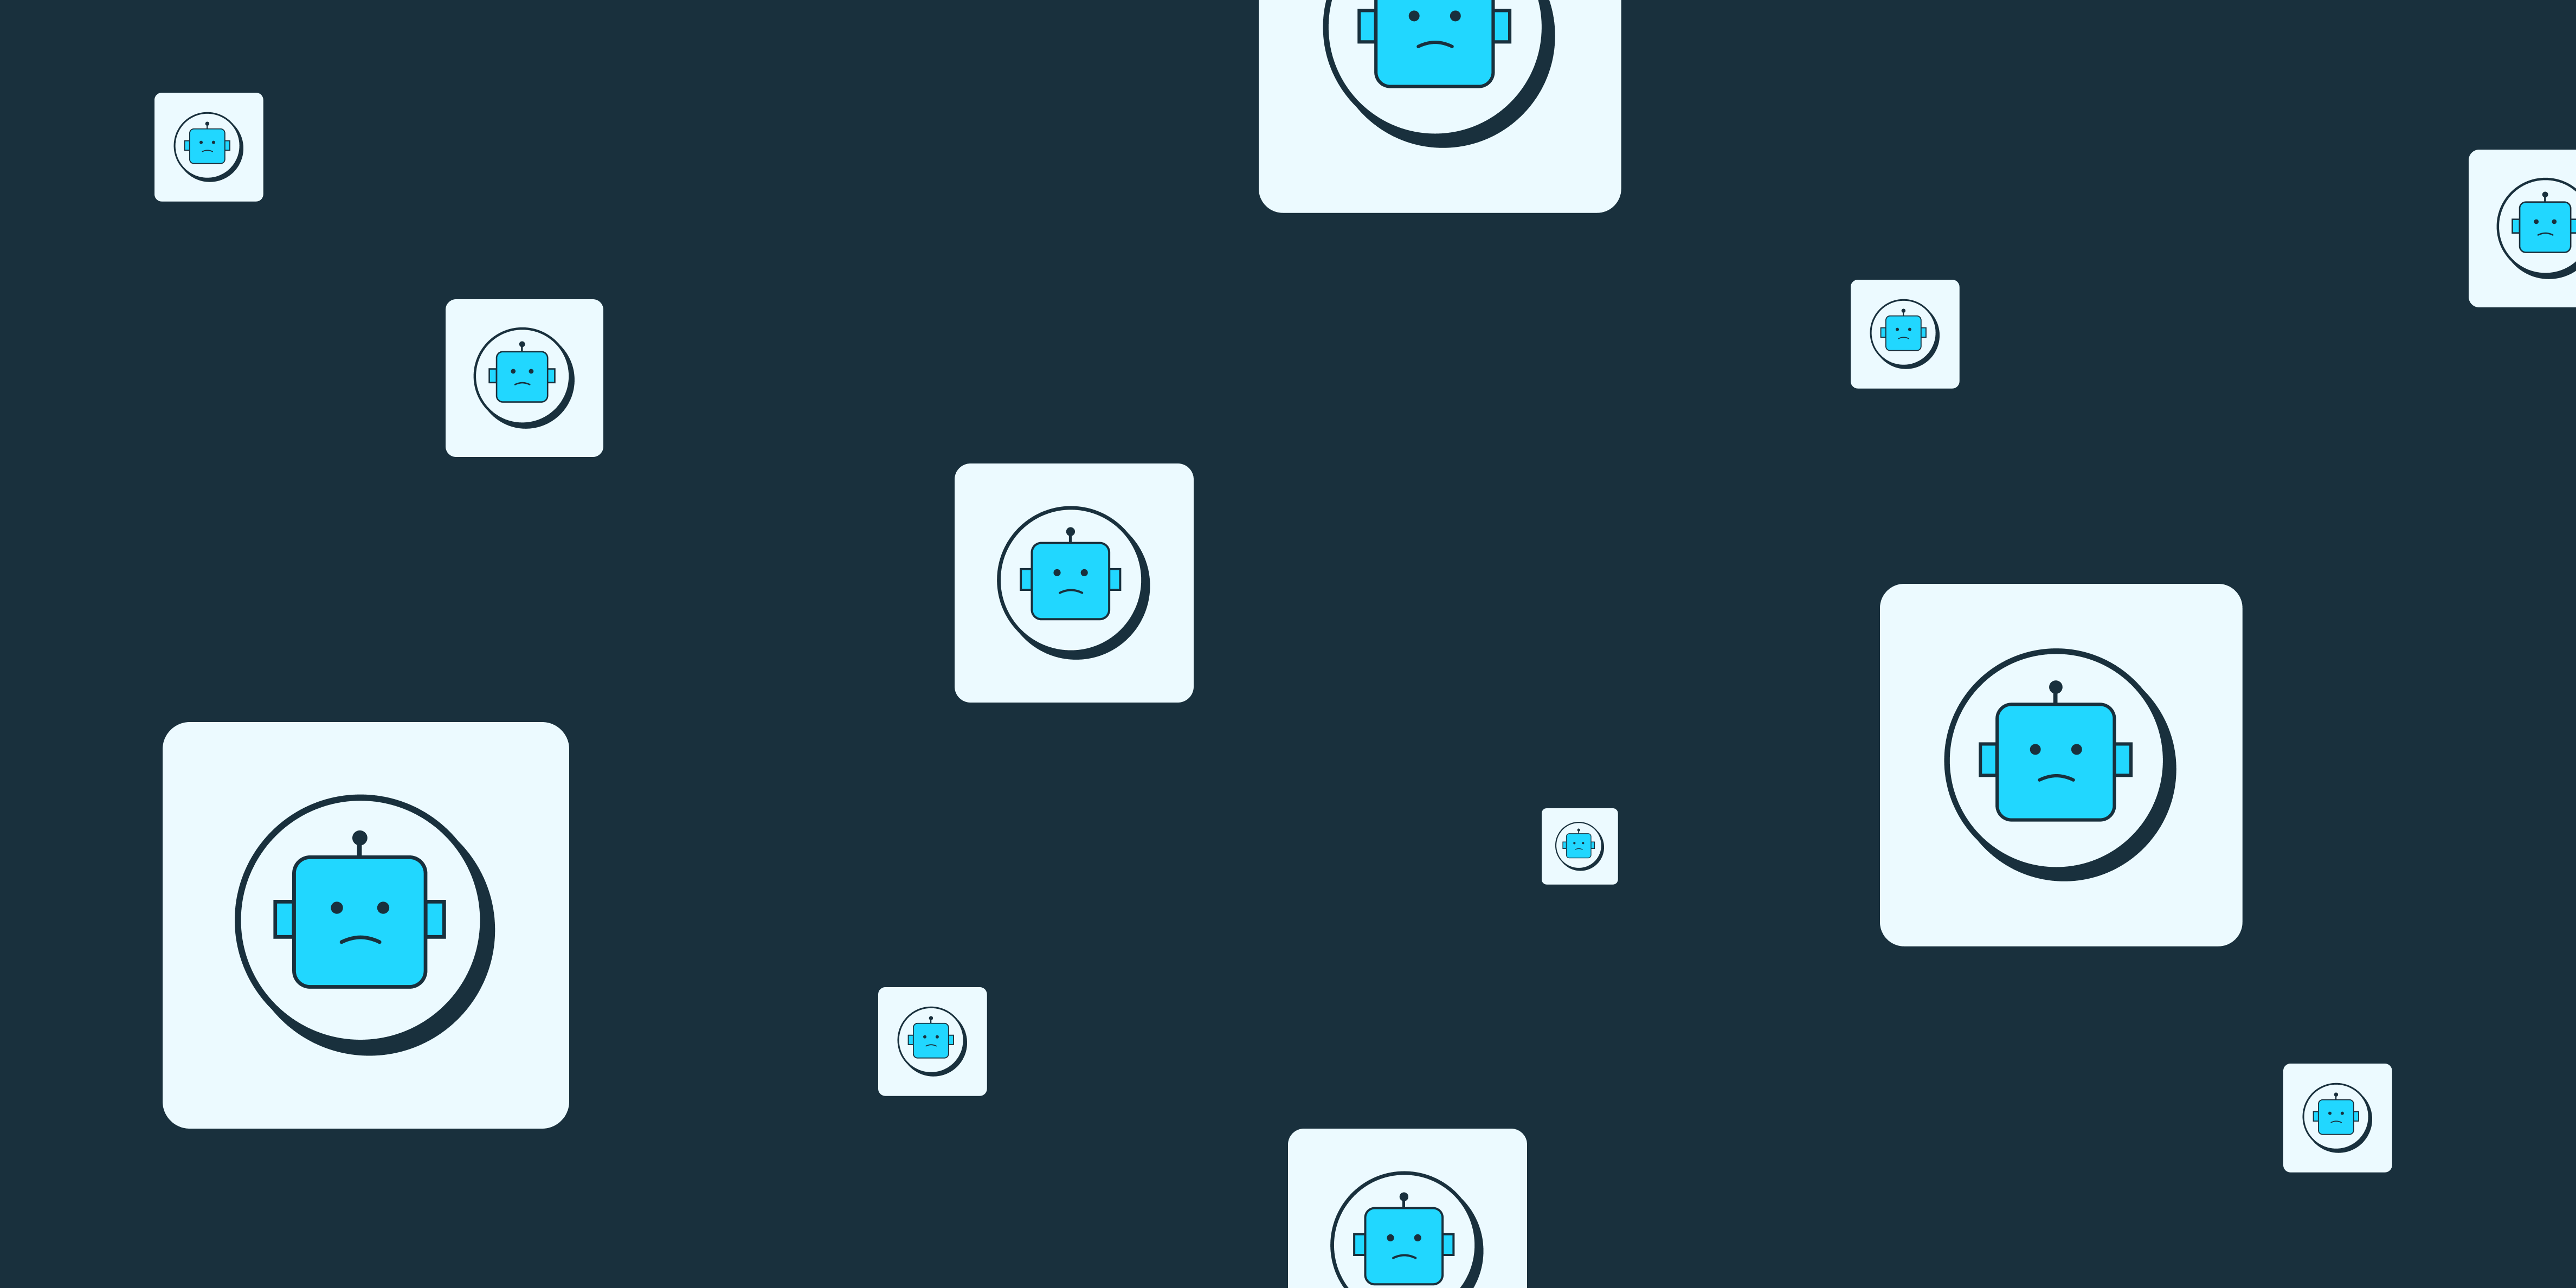 An array of light blue bot icons floating on a dark blue background